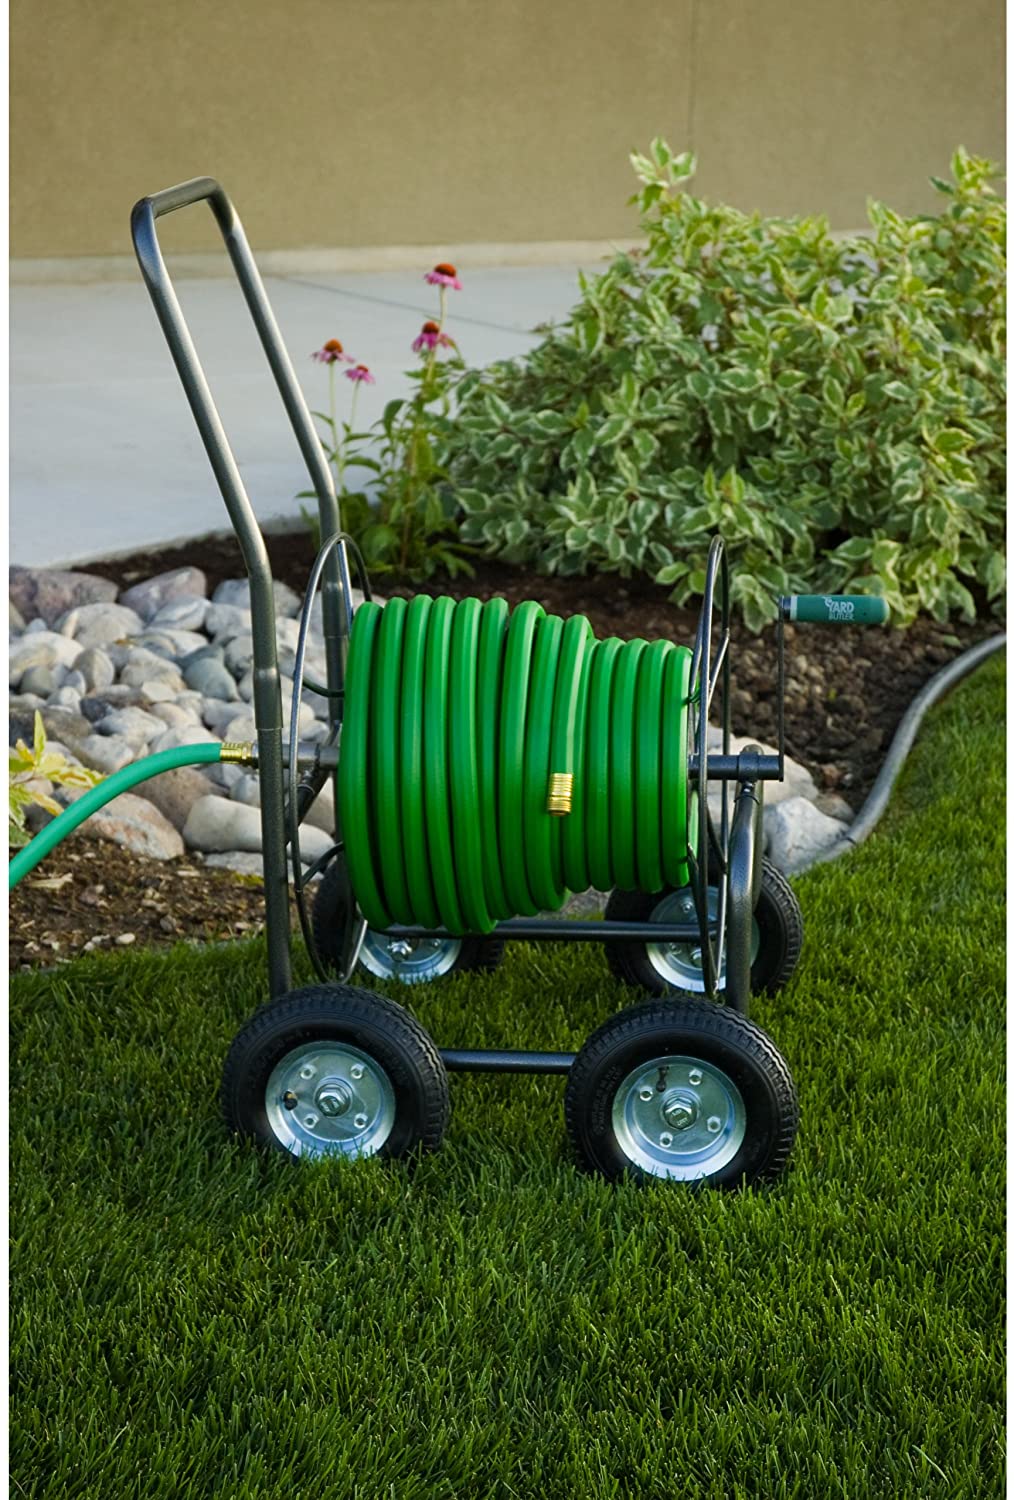 Yard Butler four wheel hose reel cart heavy duty 400 foot metal hose caddy suitable for gardens， lawns and fields Ð IHT-4EZ